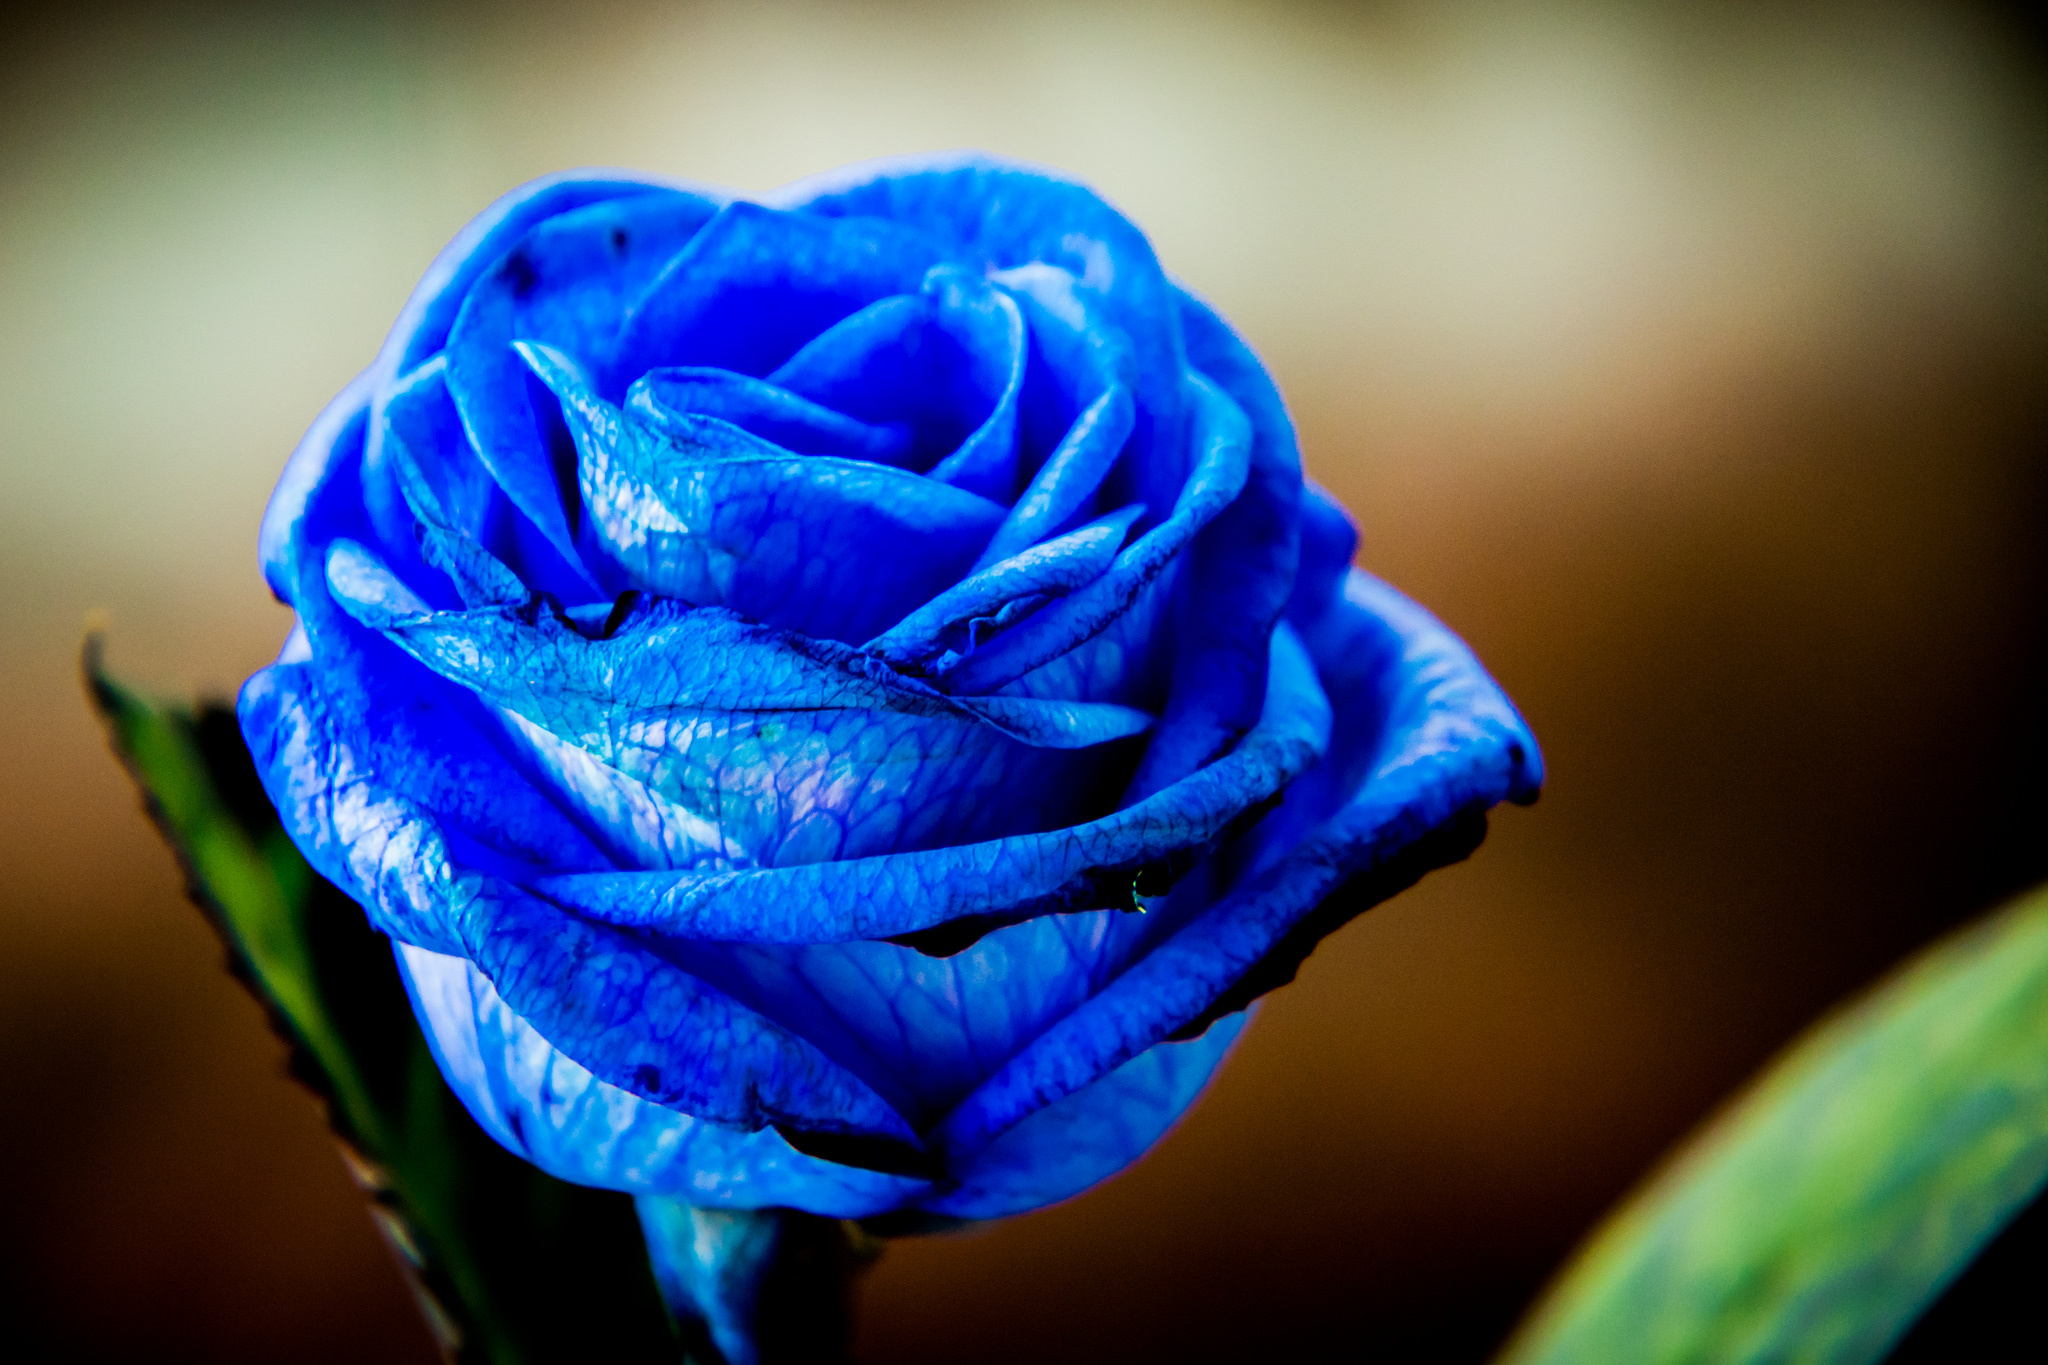 Beautiful blue rose close-up wallpapers and images - wallpapers